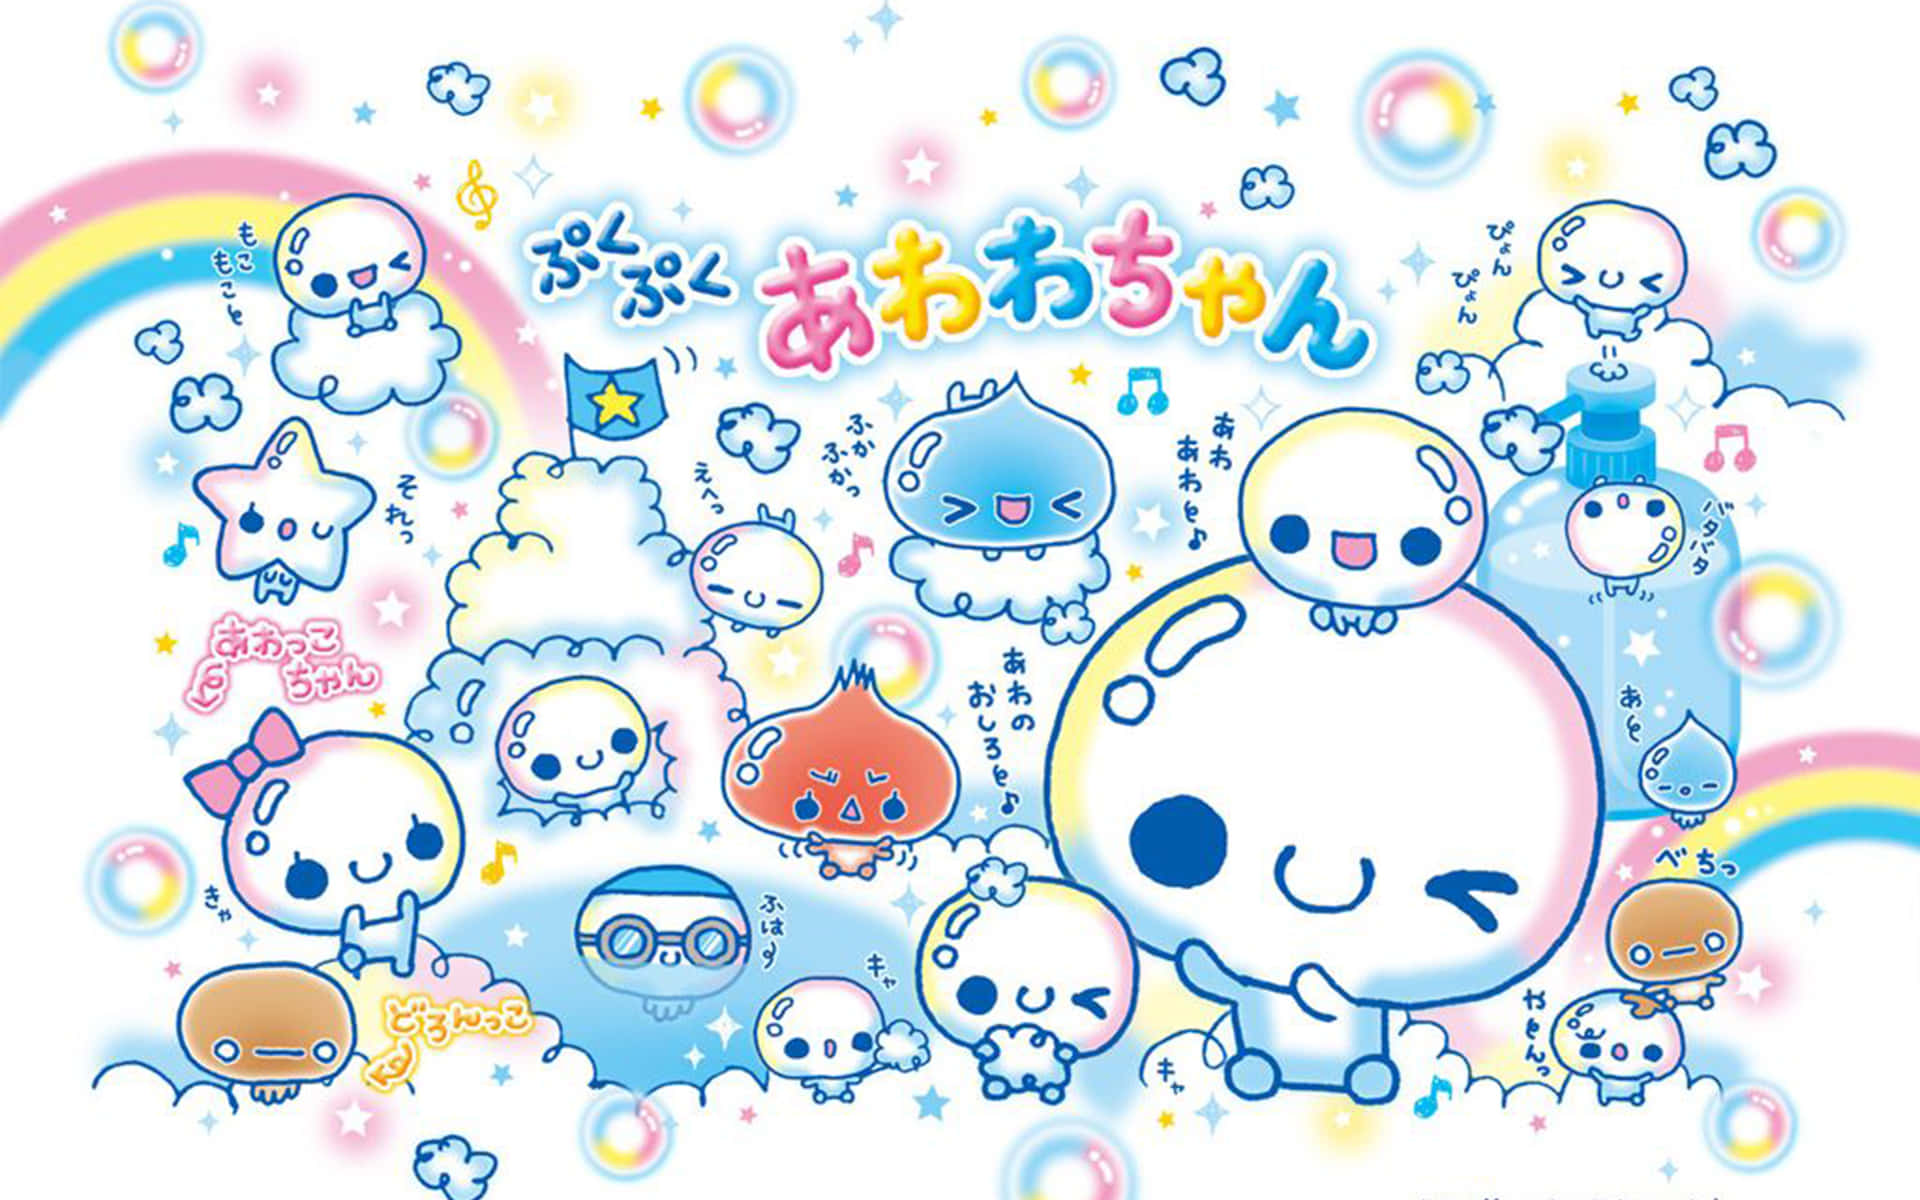 Adorable Kawaii Japanese Characters on a Vibrant Background Wallpaper